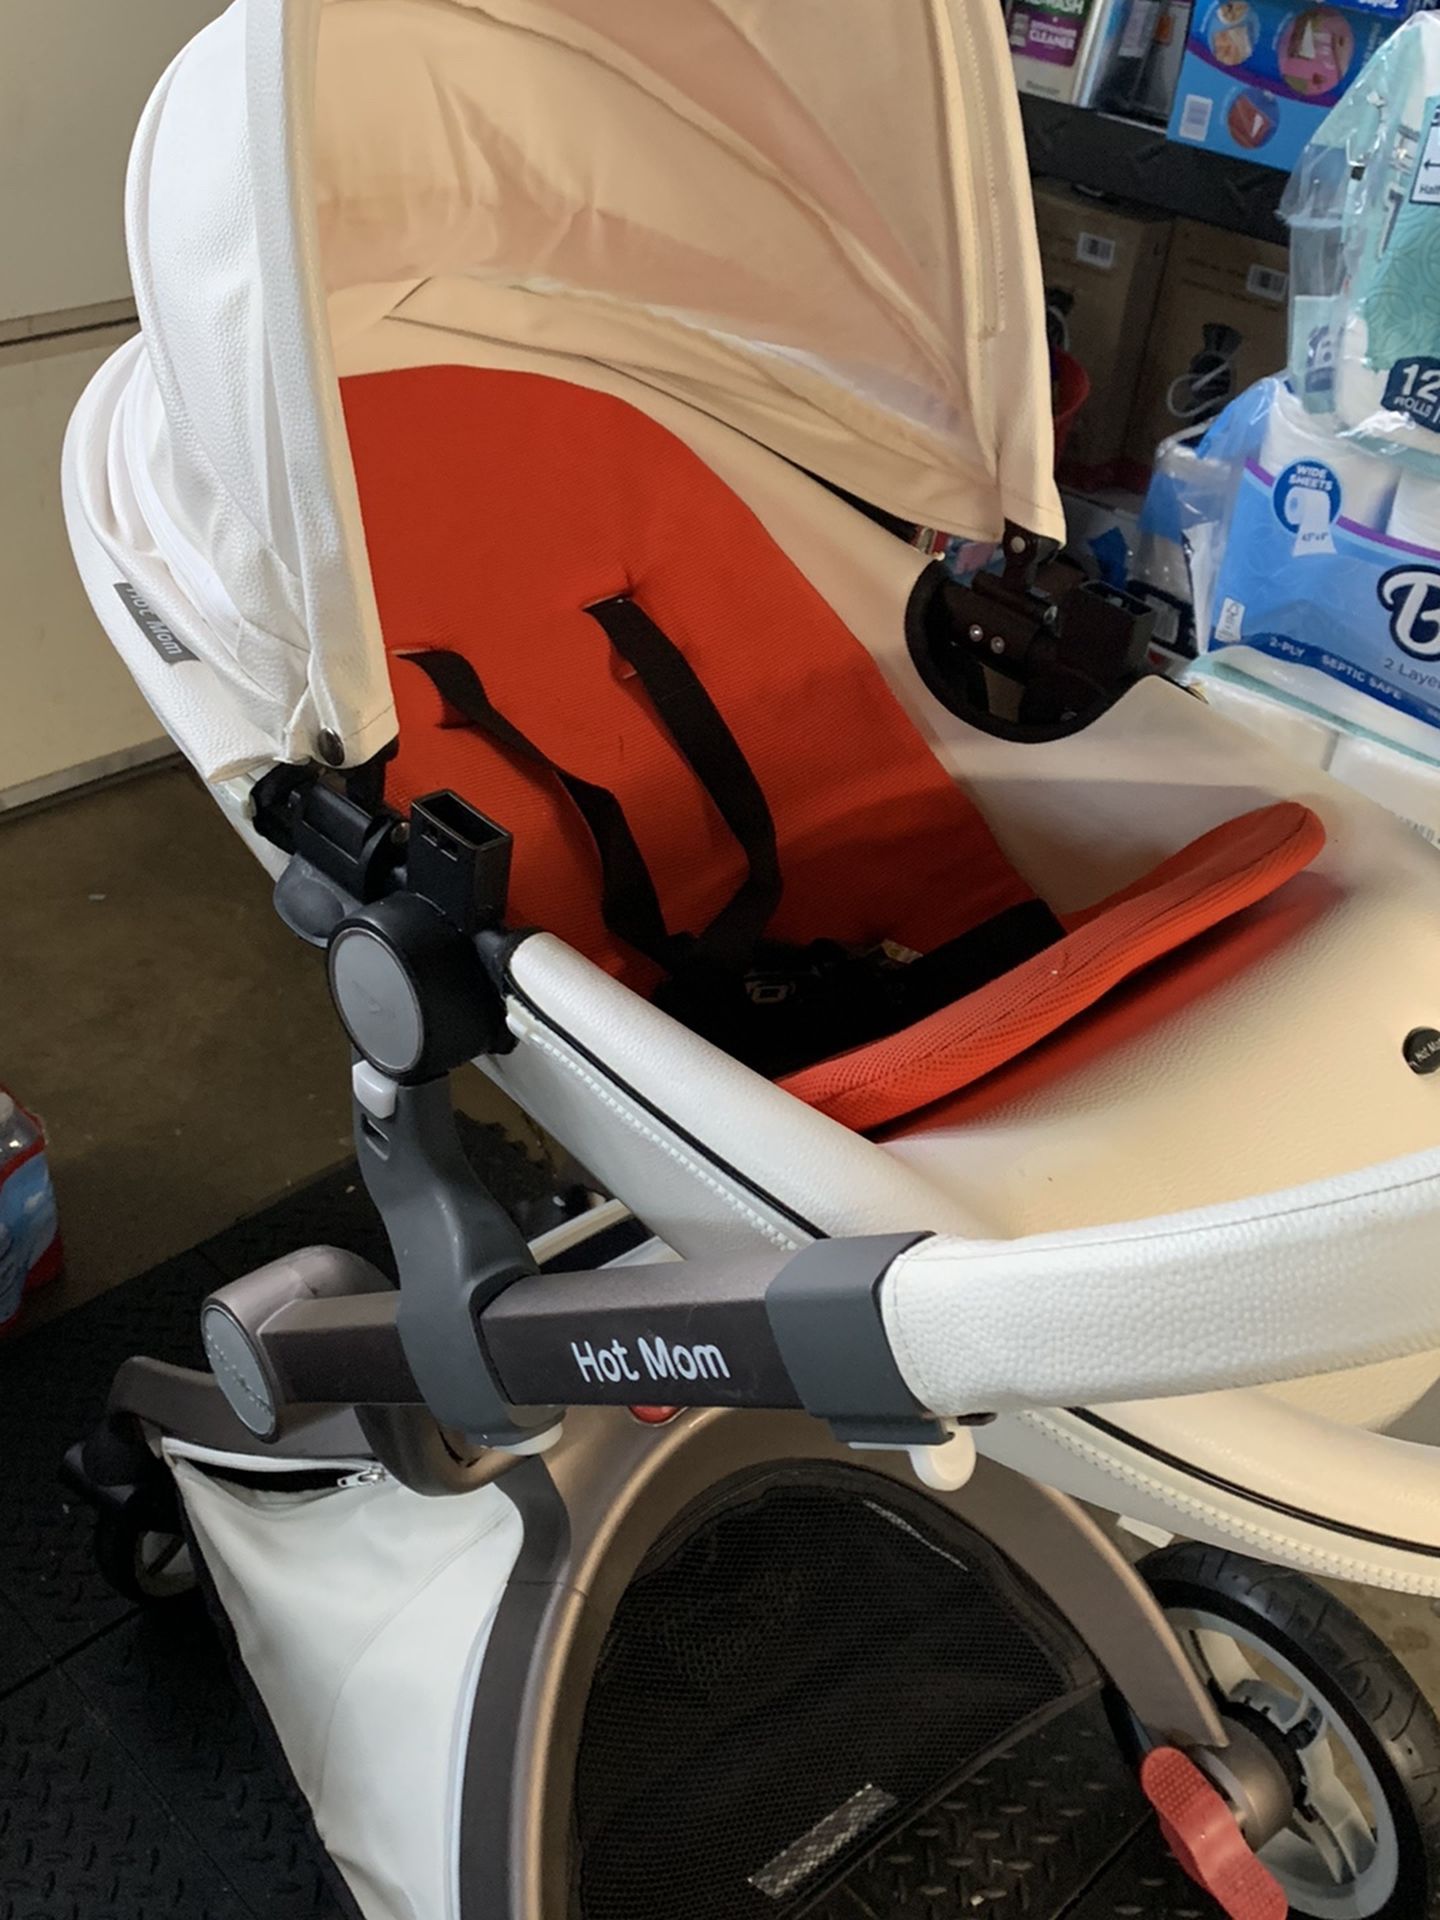 Hot Mom Stroller, Used And Good Condition